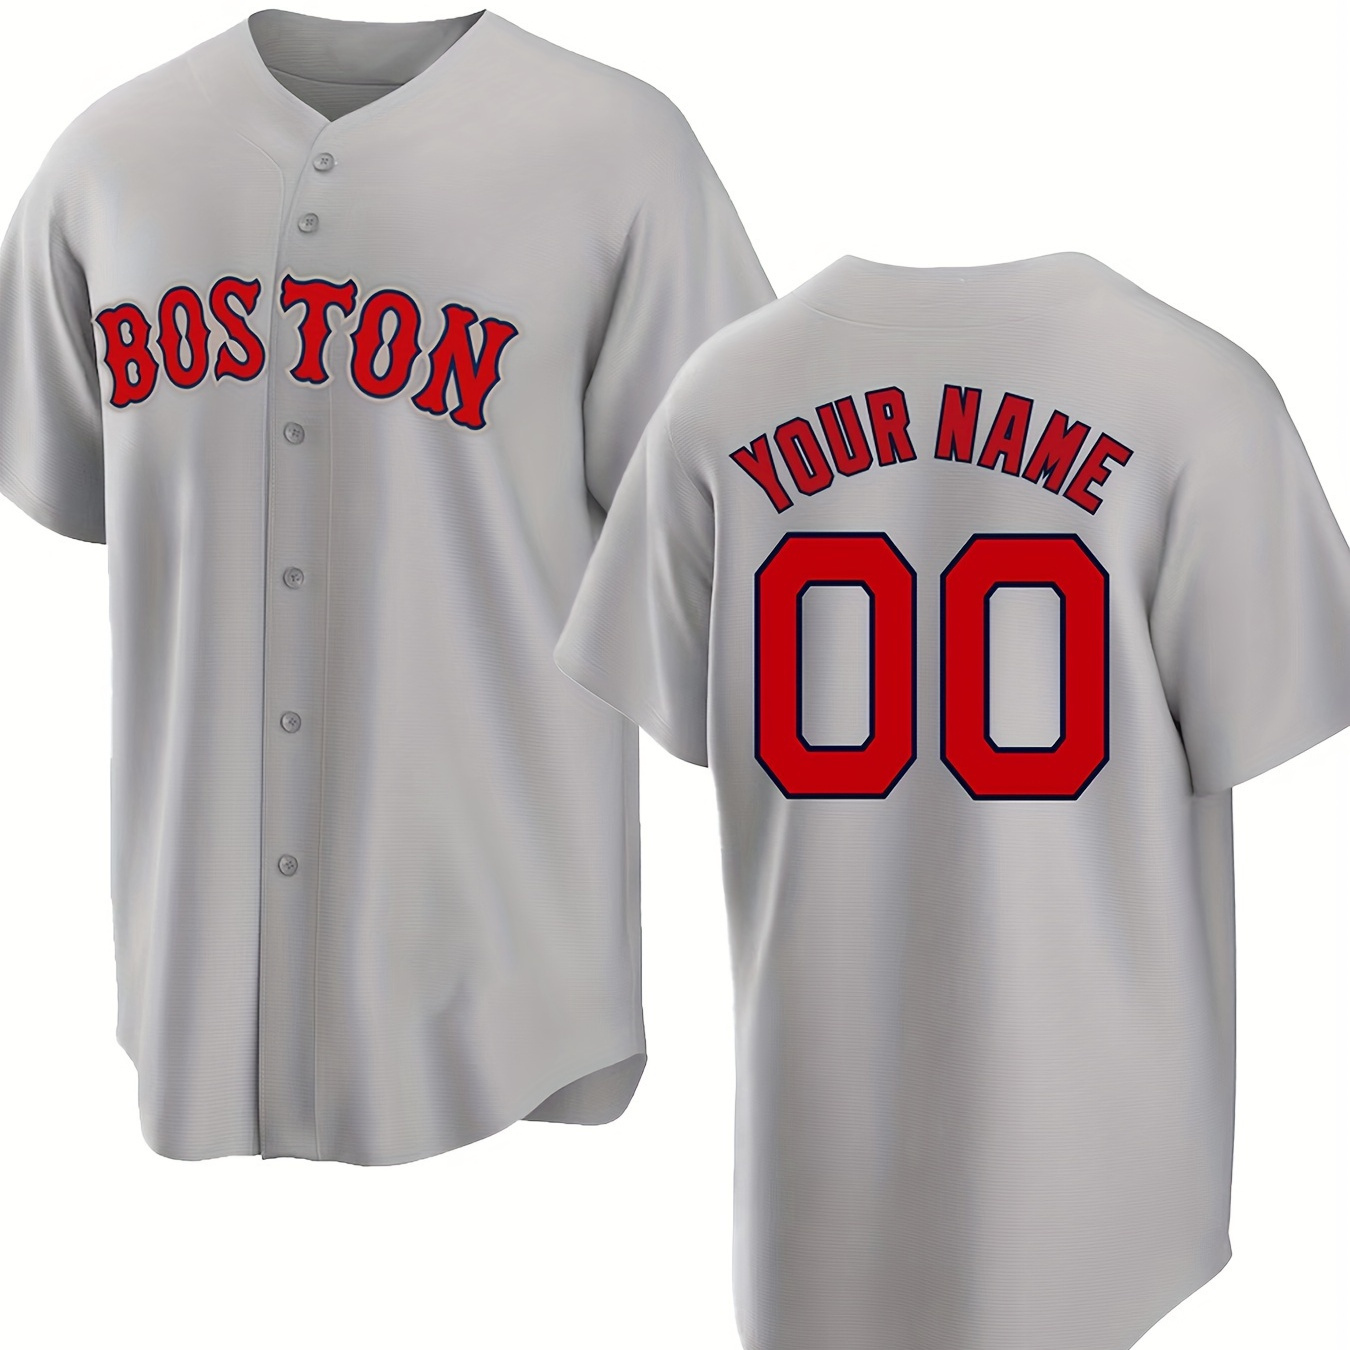 

Men's Custom Name & Numbers Jersey, Boston Graphic Print Baseball Jersey T-shirt, Competition Party Training Tees, Leisure Sports Personalized Clothing